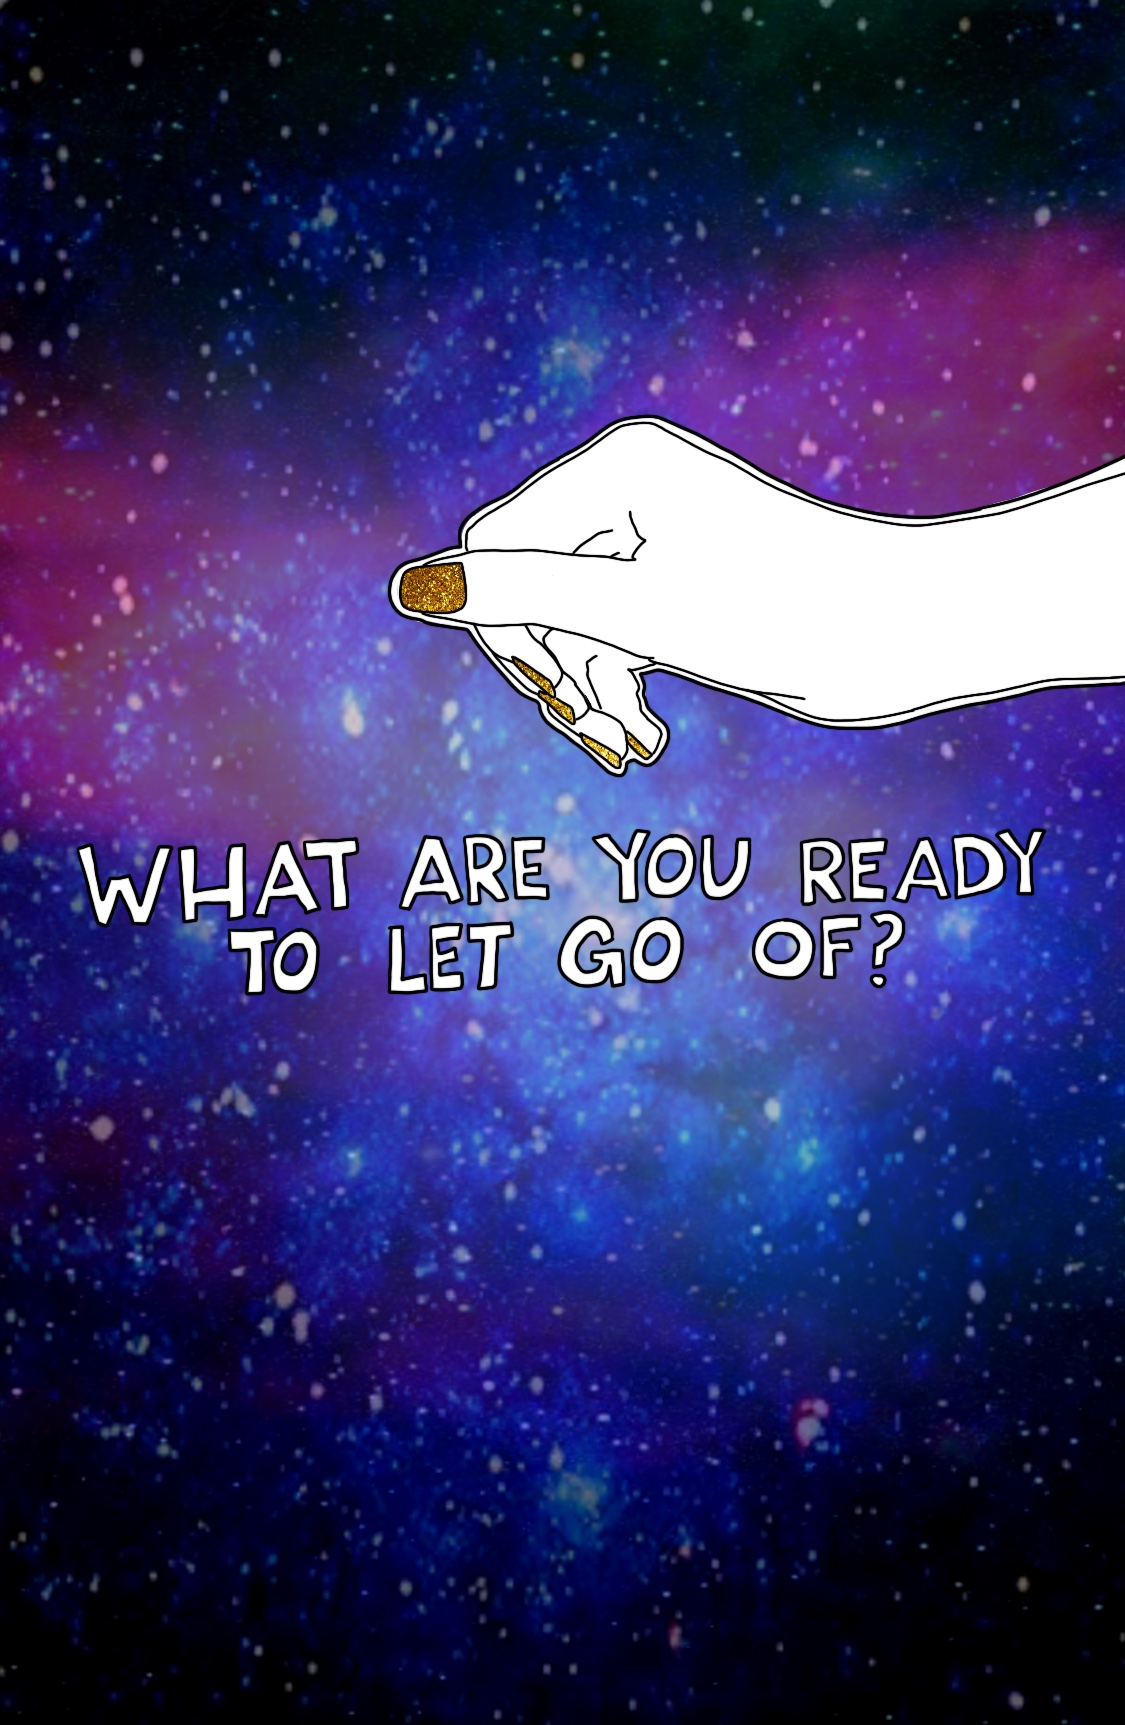 Journal prompt: What are you ready to let go of?